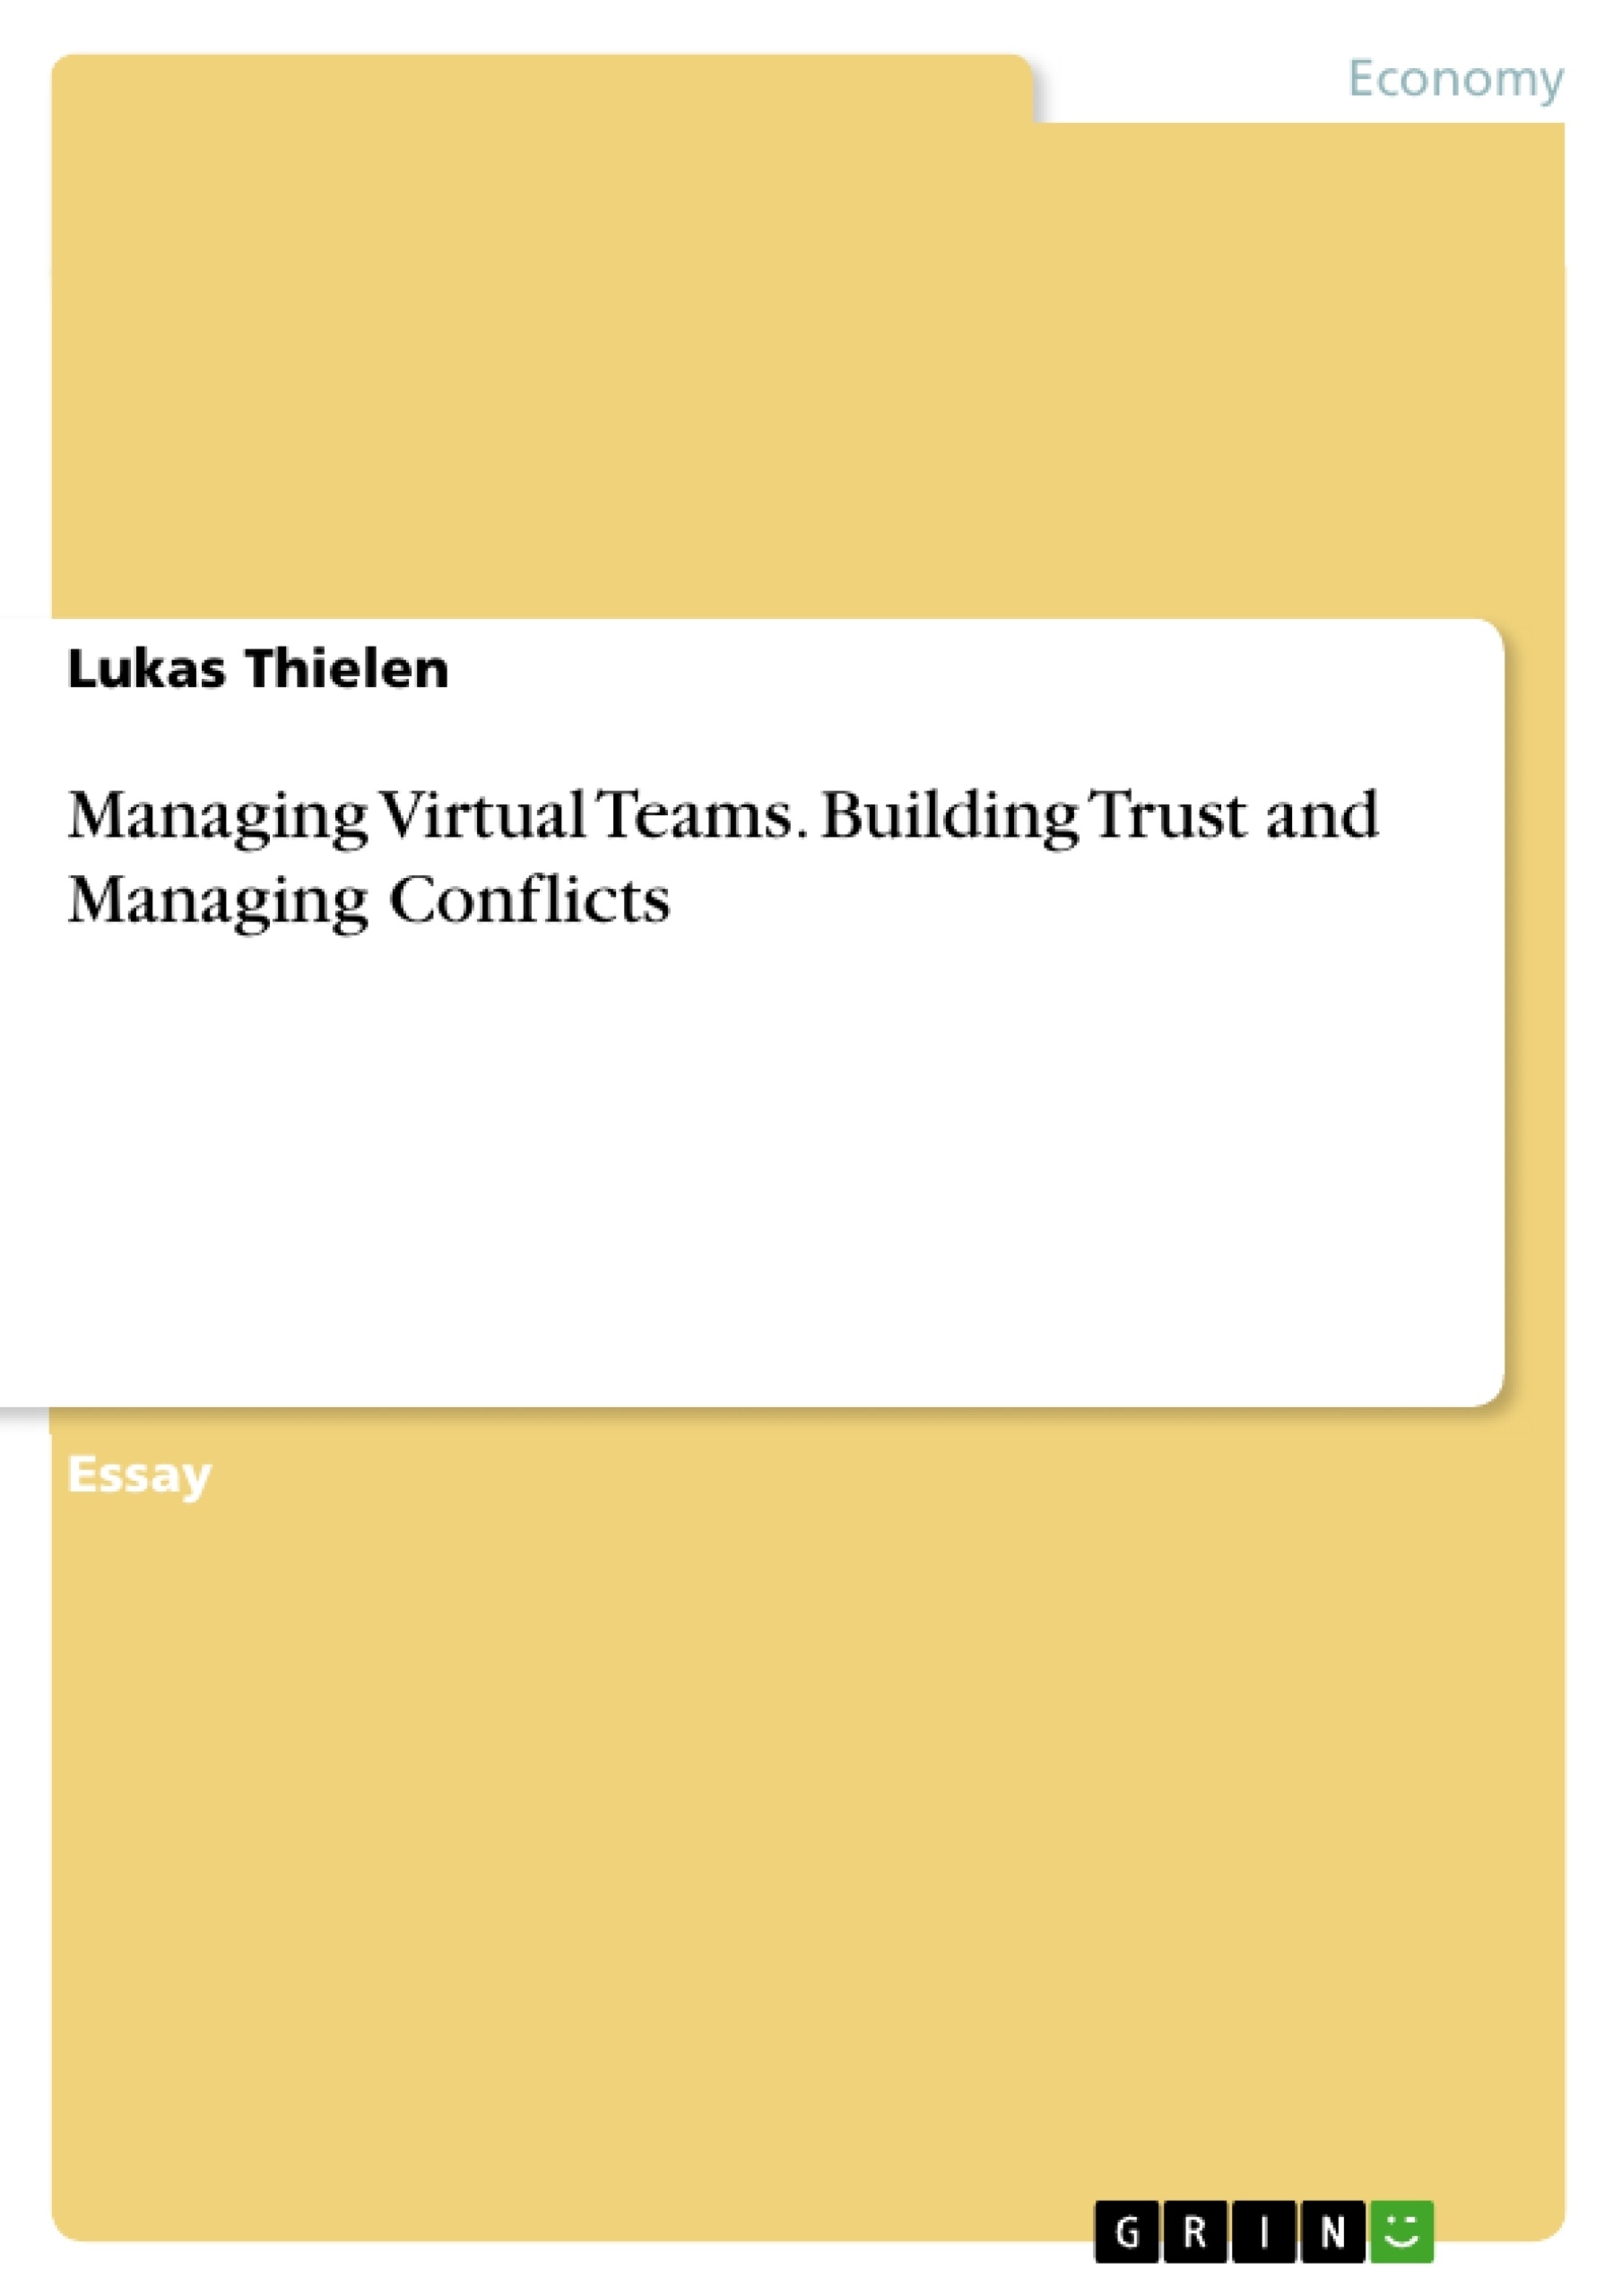 Title: Managing Virtual Teams. Building Trust and Managing Conflicts